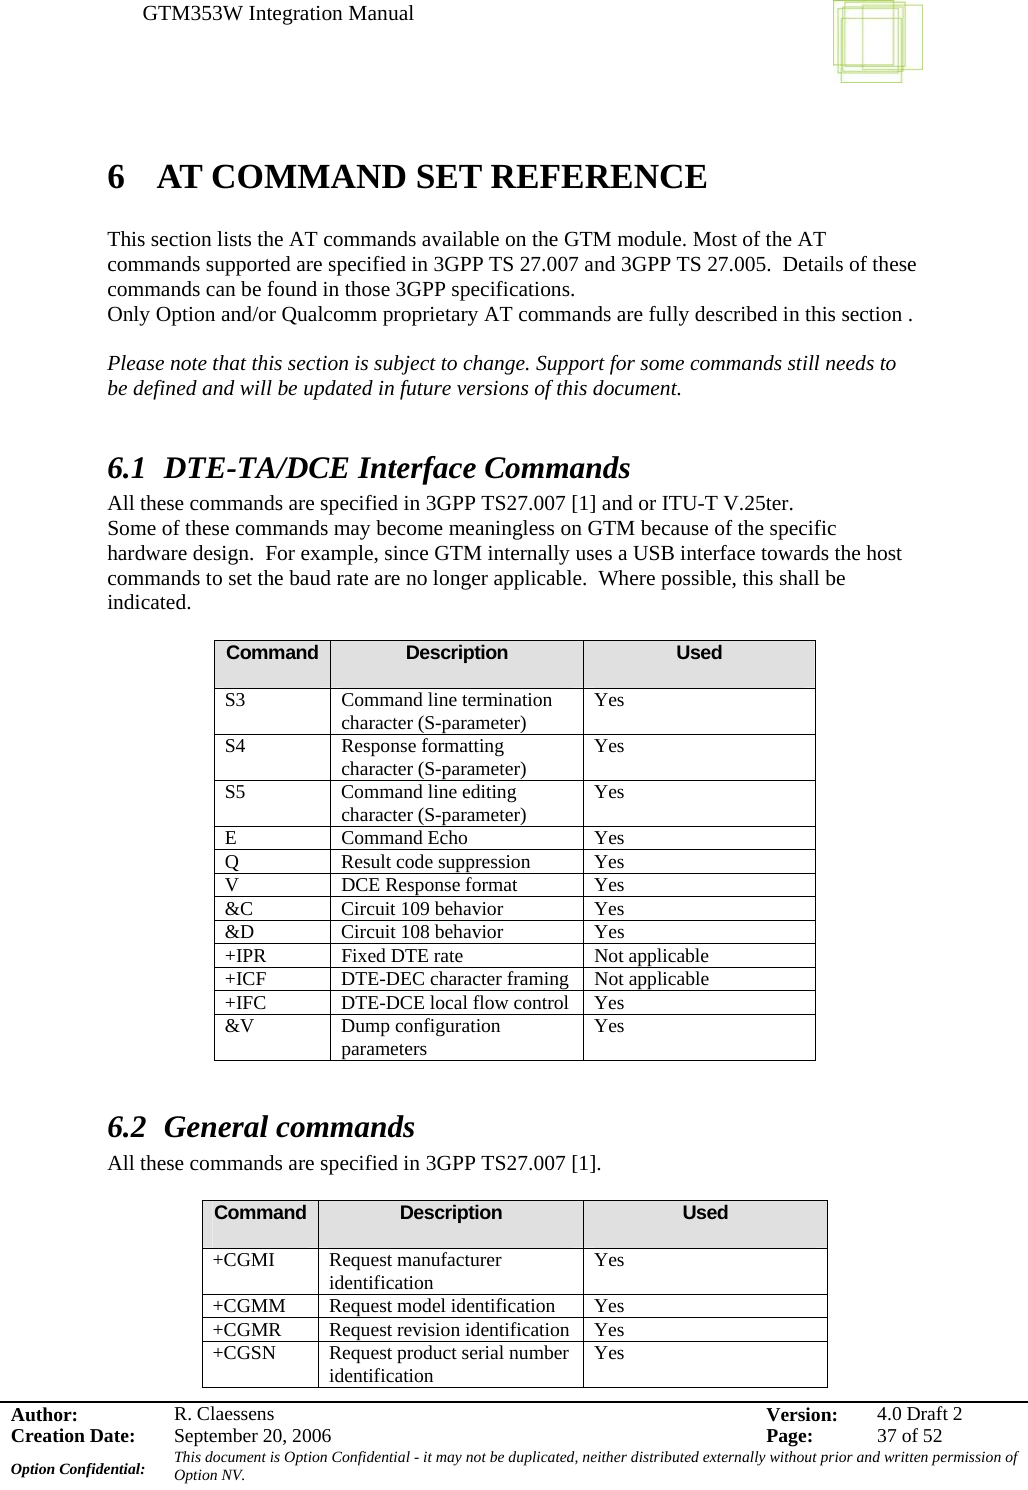 GTM353W Integration Manual      Author: R. Claessens  Version:  4.0 Draft 2Creation Date:  September 20, 2006  Page:  37 of 52 Option Confidential:  This document is Option Confidential - it may not be duplicated, neither distributed externally without prior and written permission of Option NV.    6  AT COMMAND SET REFERENCE  This section lists the AT commands available on the GTM module. Most of the AT commands supported are specified in 3GPP TS 27.007 and 3GPP TS 27.005.  Details of these commands can be found in those 3GPP specifications. Only Option and/or Qualcomm proprietary AT commands are fully described in this section .  Please note that this section is subject to change. Support for some commands still needs to be defined and will be updated in future versions of this document.  6.1 DTE-TA/DCE Interface Commands All these commands are specified in 3GPP TS27.007 [1] and or ITU-T V.25ter. Some of these commands may become meaningless on GTM because of the specific hardware design.  For example, since GTM internally uses a USB interface towards the host commands to set the baud rate are no longer applicable.  Where possible, this shall be indicated.  Command  Description  Used S3 Command line termination character (S-parameter)  Yes S4 Response formatting character (S-parameter)  Yes S5 Command line editing character (S-parameter)  Yes E Command Echo  Yes Q  Result code suppression  Yes V DCE Response format Yes &amp;C  Circuit 109 behavior  Yes &amp;D  Circuit 108 behavior  Yes +IPR  Fixed DTE rate  Not applicable +ICF  DTE-DEC character framing  Not applicable +IFC  DTE-DCE local flow control  Yes &amp;V Dump configuration parameters  Yes  6.2 General commands All these commands are specified in 3GPP TS27.007 [1].  Command  Description  Used +CGMI Request manufacturer identification  Yes +CGMM Request model identification Yes +CGMR Request revision identification Yes +CGSN  Request product serial number identification  Yes 